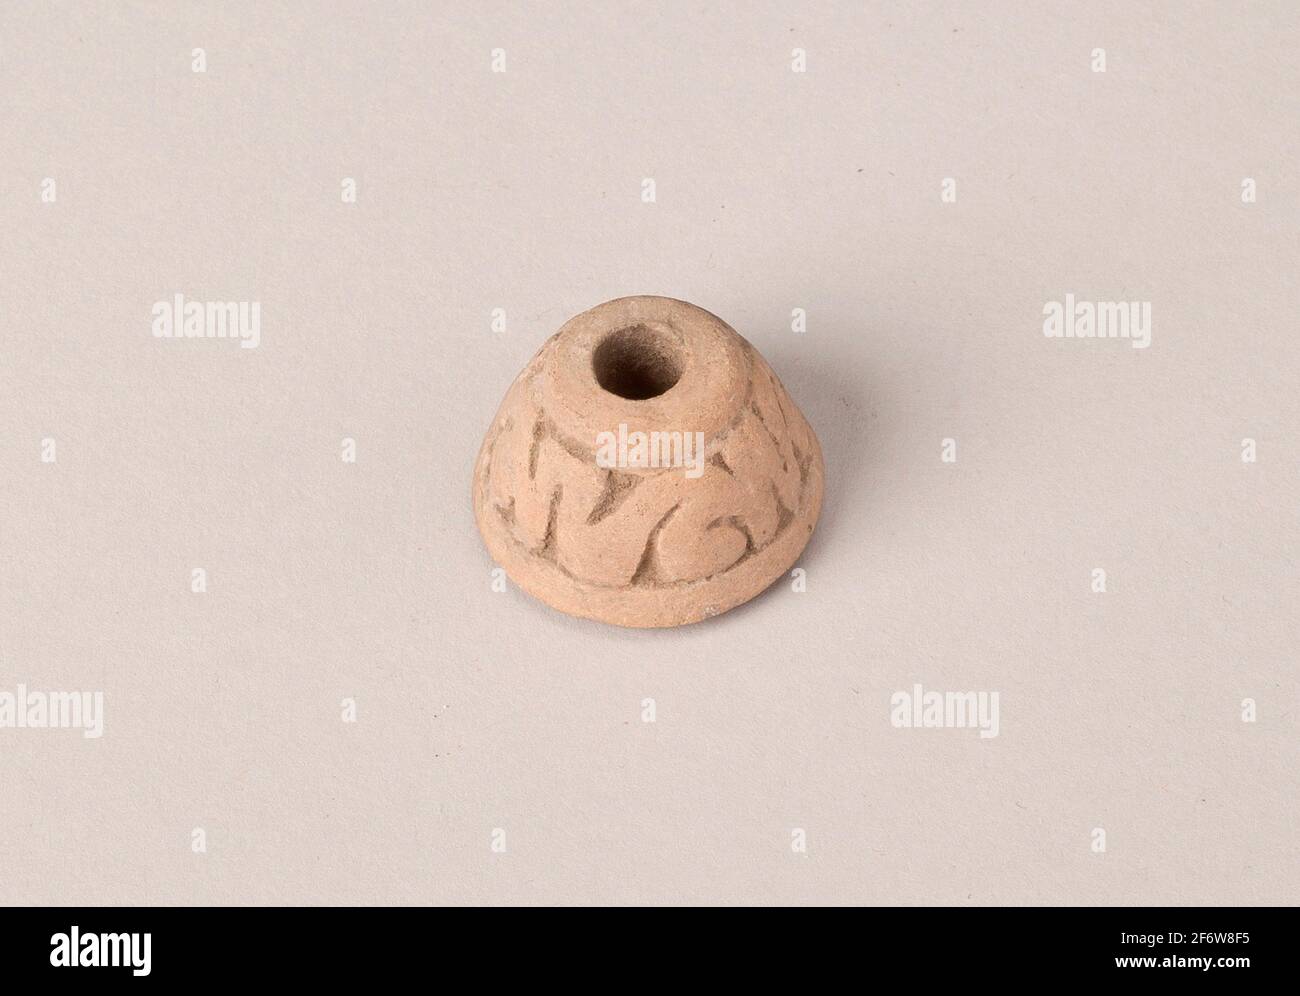 Author: Aztec (Mexica). Ear Ornament or Spindle Whorl with Modeled Design - A.D. 1450/1521 - Aztec (Mexica) Valley of Mexico, Mexico. Ceramic. 1450 - Stock Photo